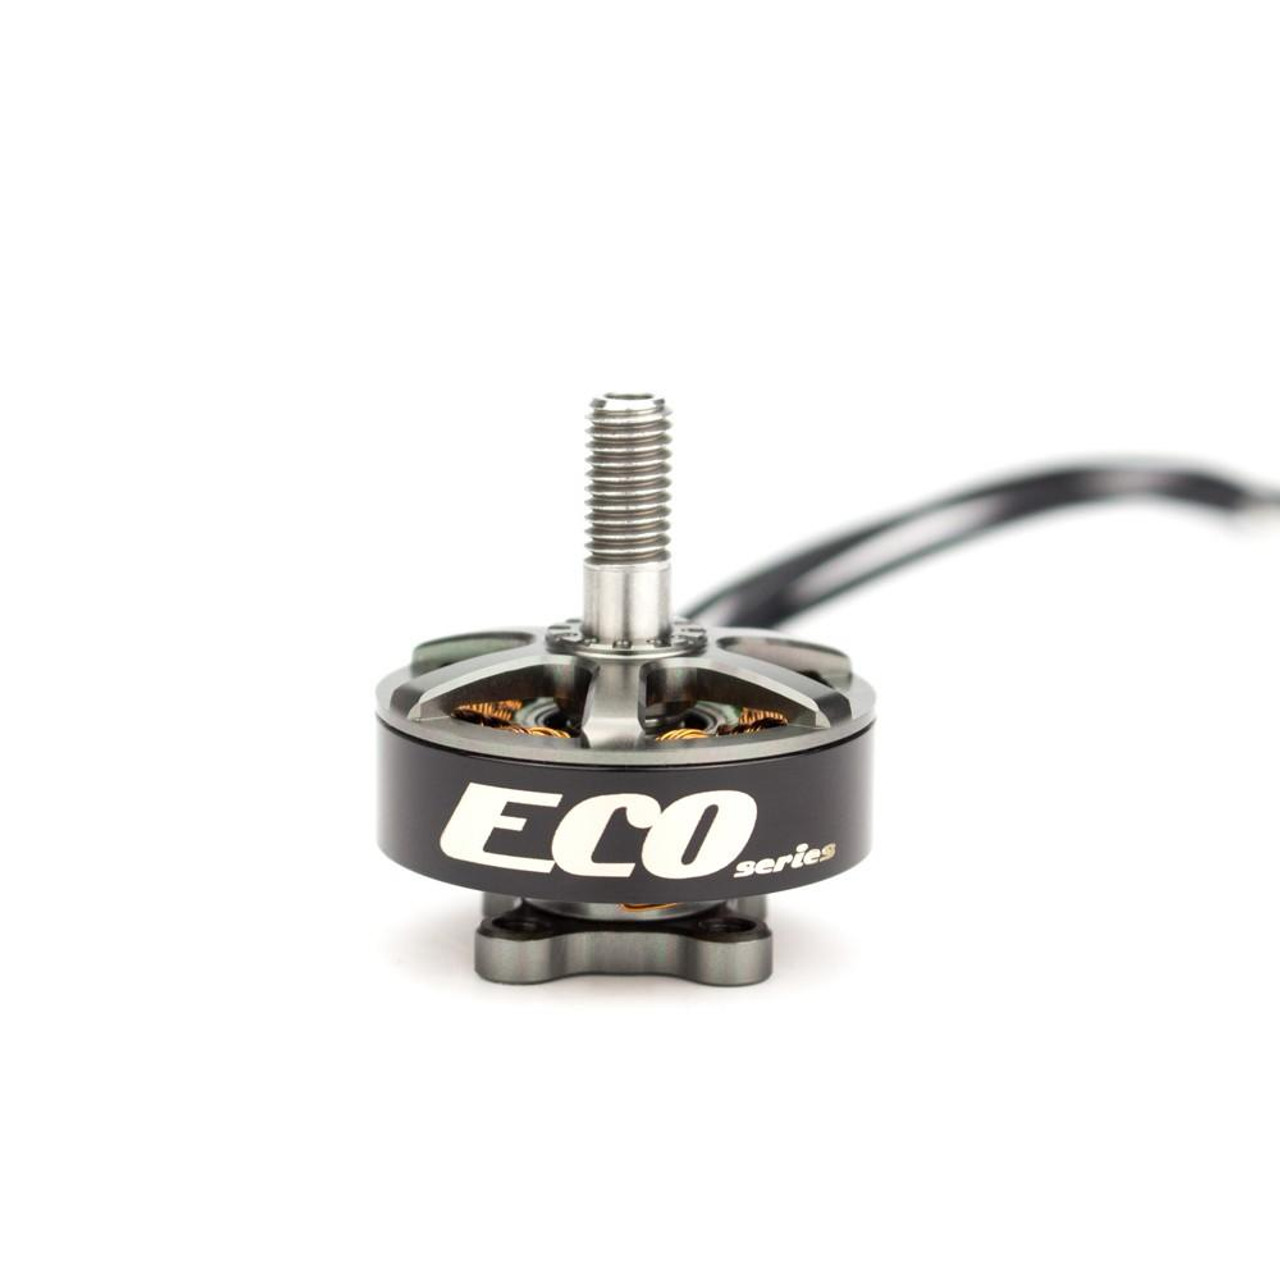 EMAX ECO Series 2207 2400KV Brushless Motor for RC Drone FPV Racing